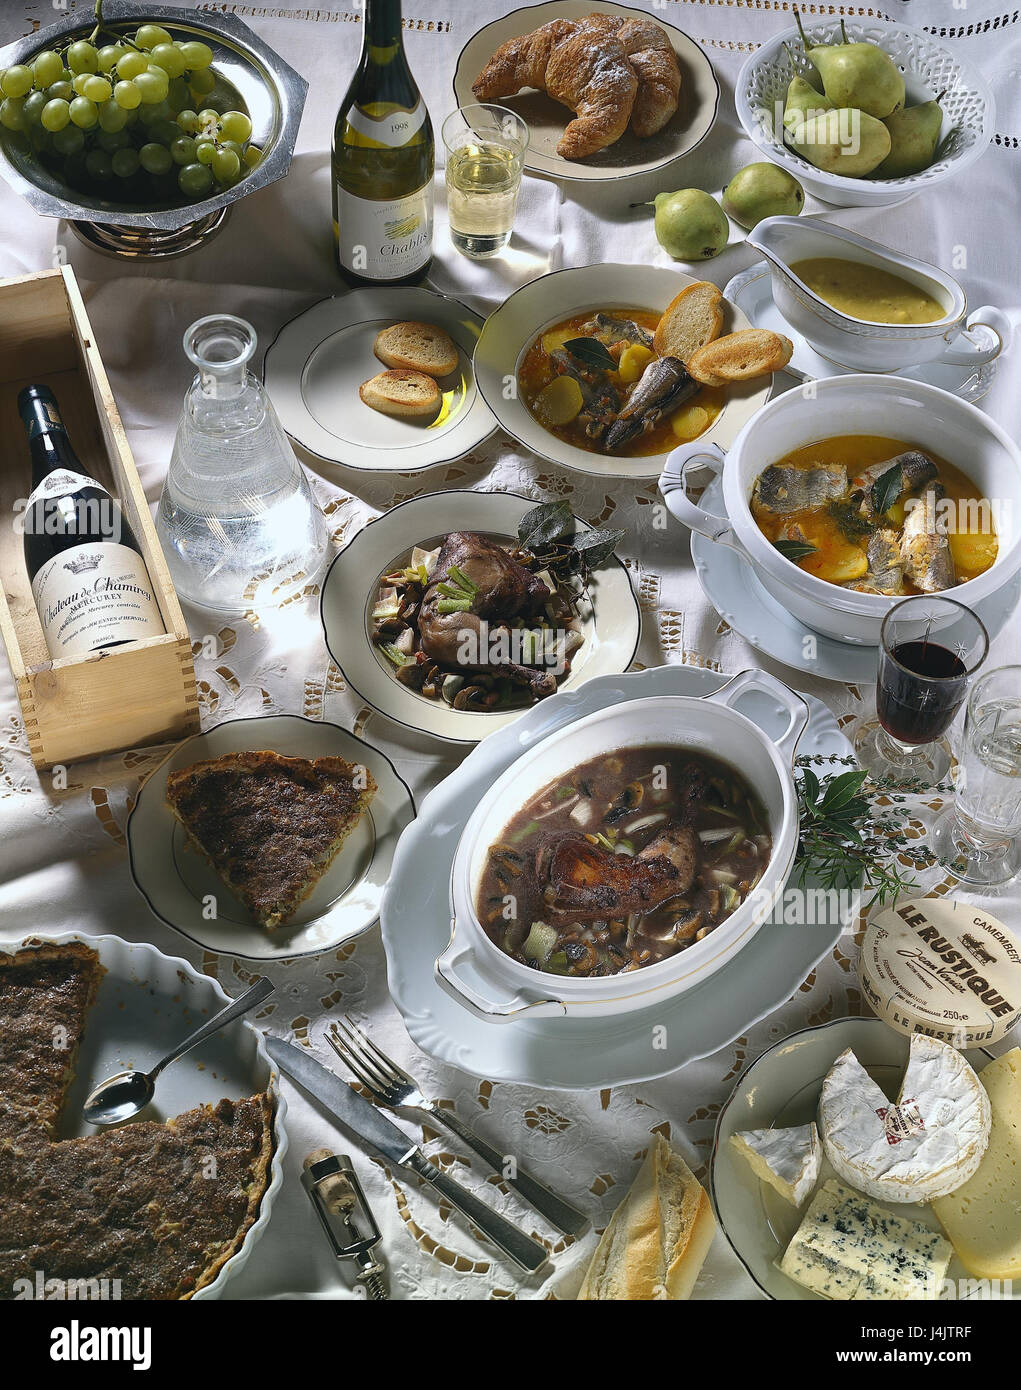 Foods, drinks, in French, bouillabaisse, Coq ouch Vin, quiche Lorraine  Still life, object photography, cuisine, dishes, France, typically,  specialities, cheese, Camembert, fish soup, main courses, desserts, side  dishes, wine, white, red, red